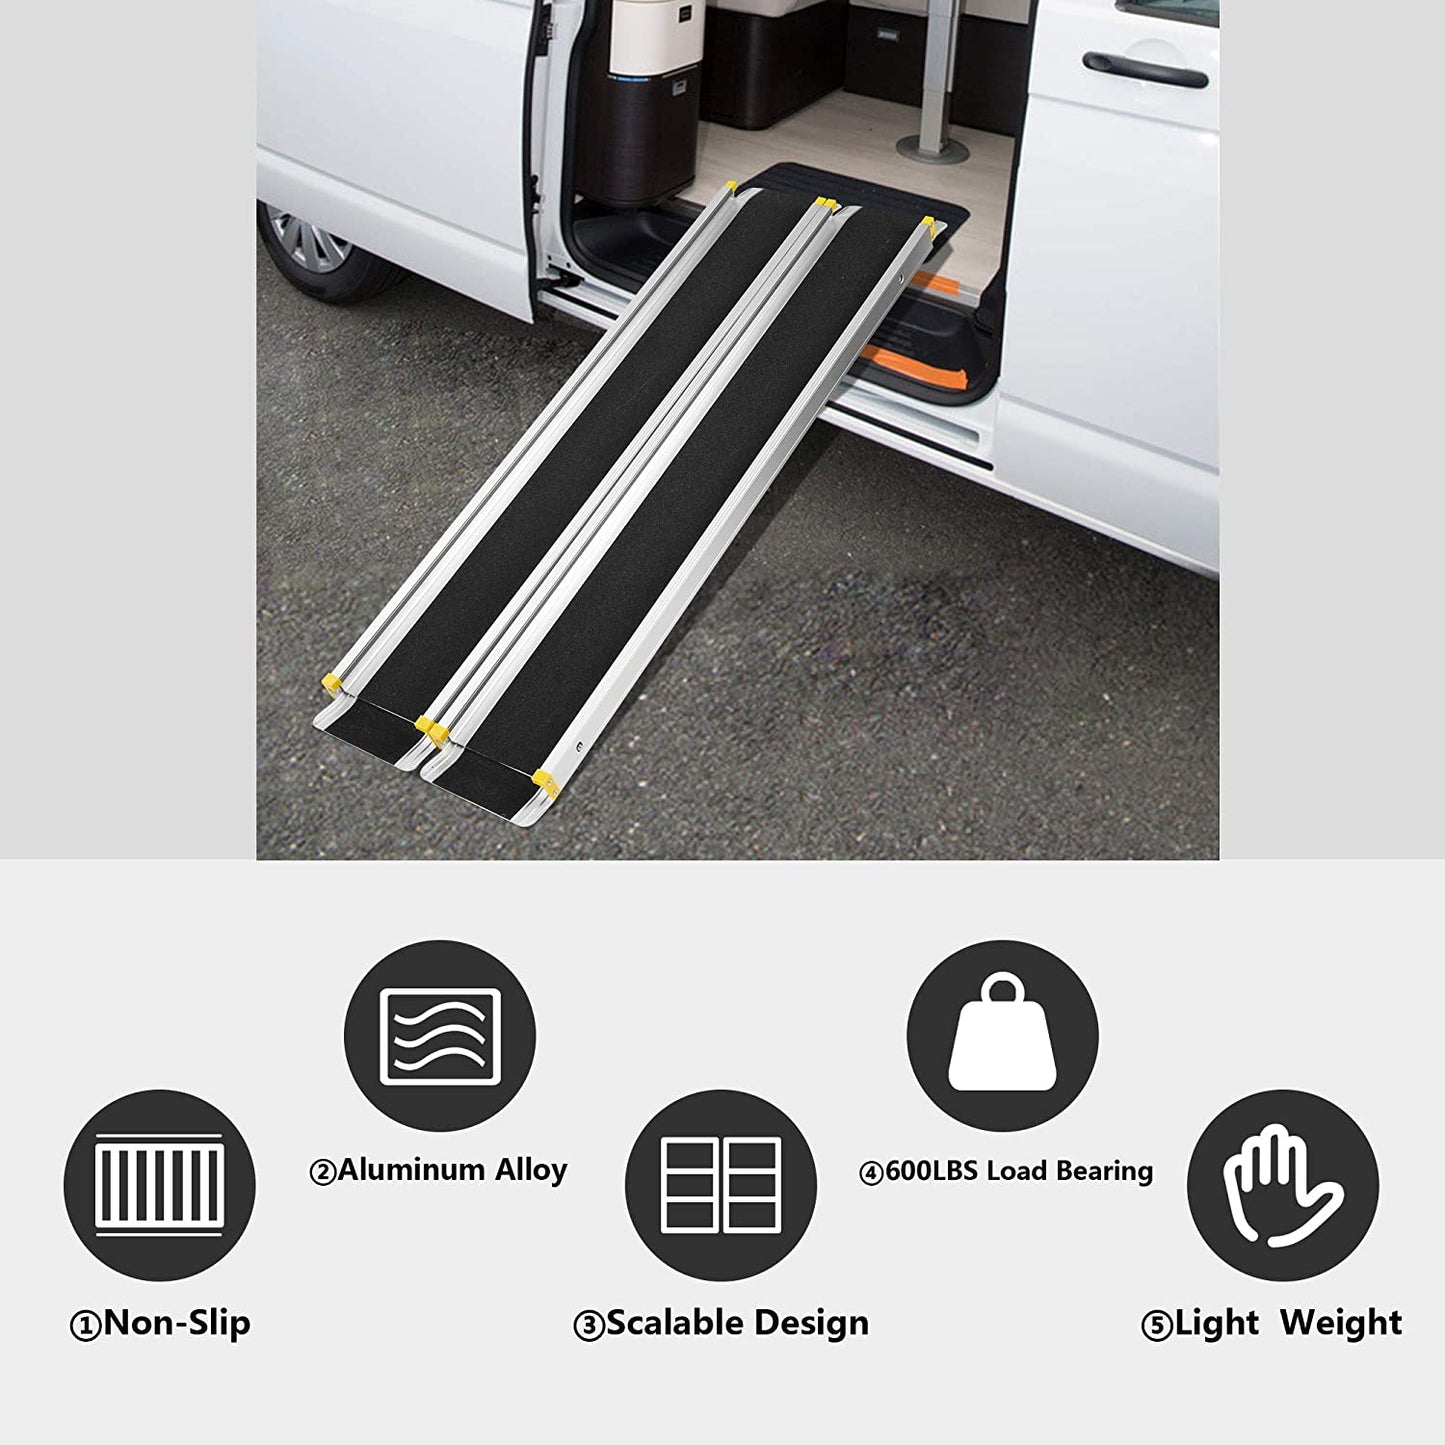 7Ft Portable Wheelchair Ramp Aluminum(19LBS), Telescoping, Retractable, Lightweight, Non Skid Utility Wheelchair Ramps, Skidproof PVC Carpeted, for Doorways, Stairs, Mobility Scooter, Porch